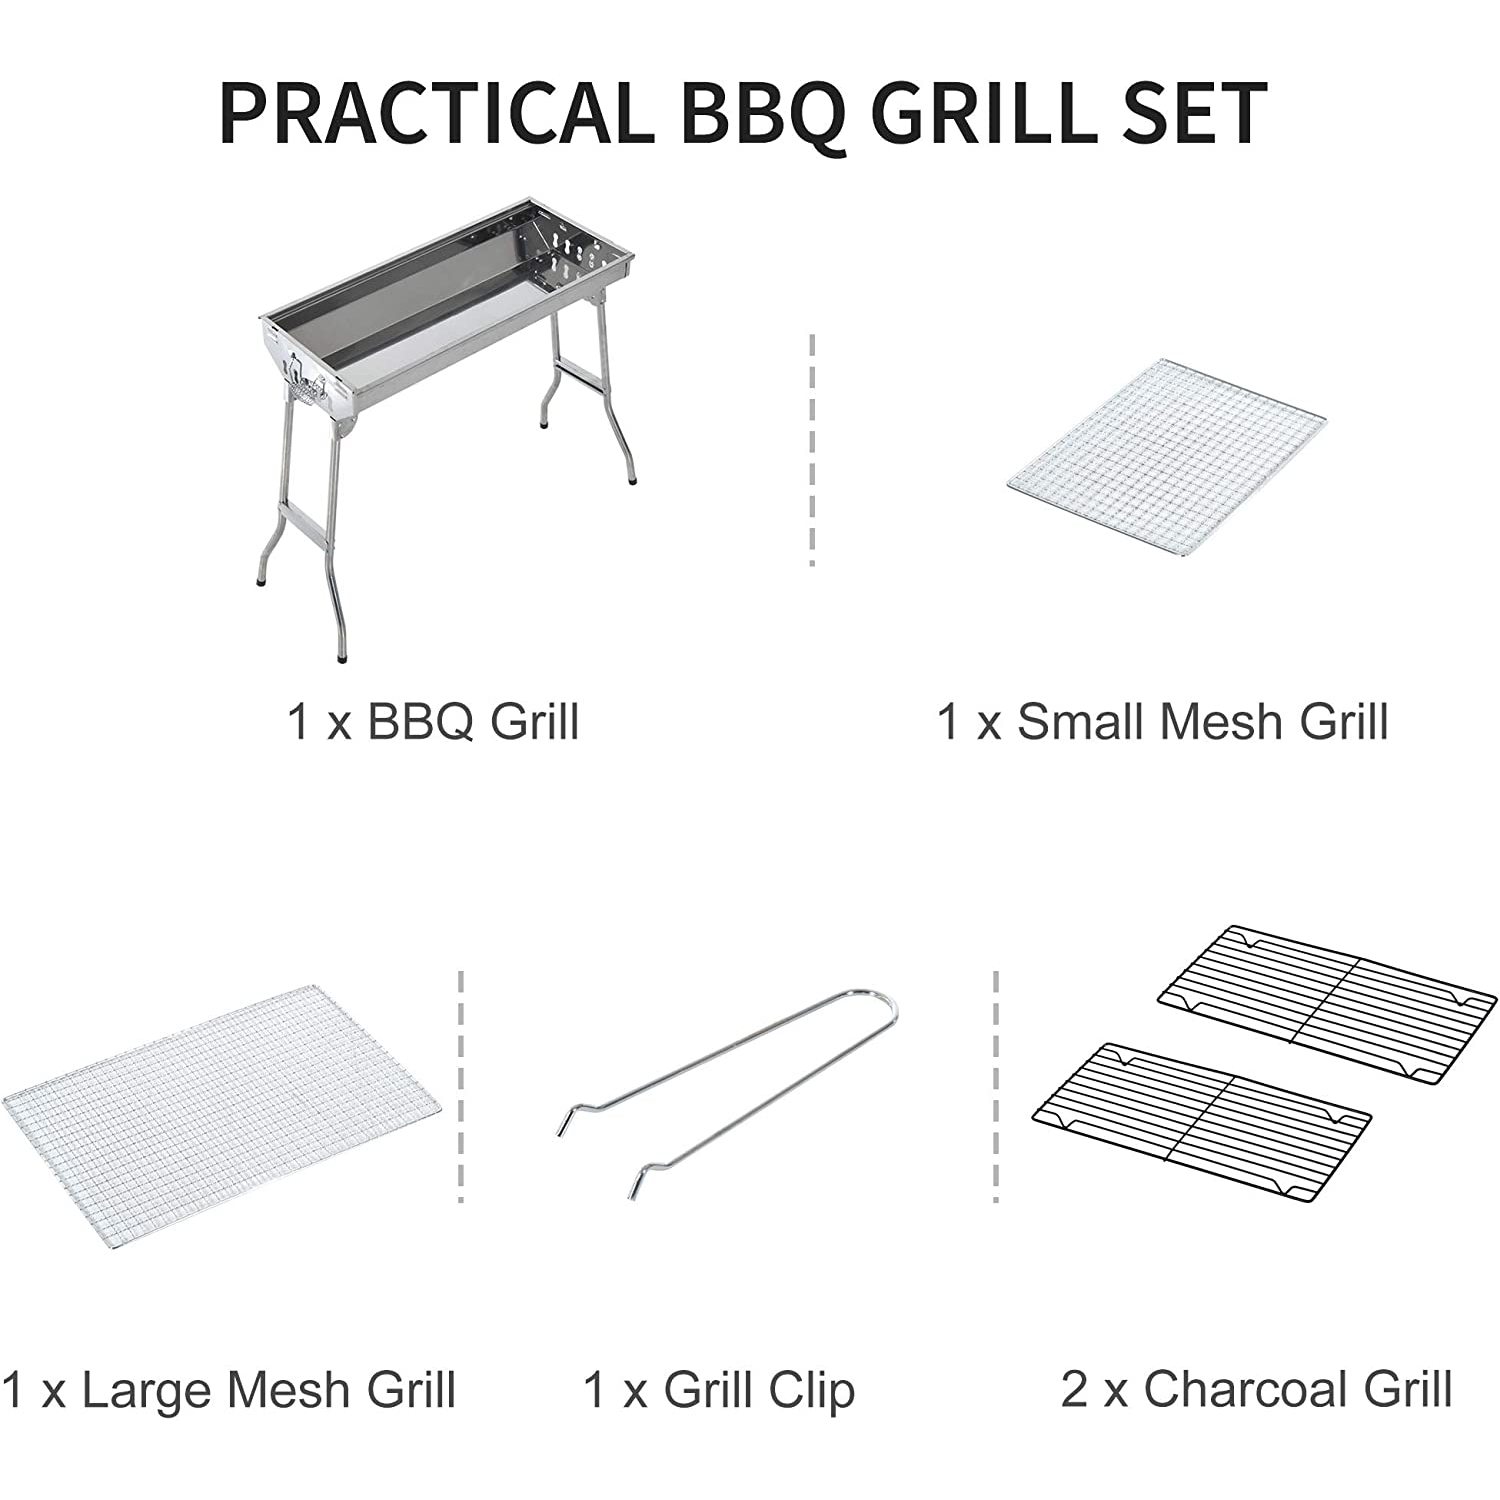 Bilot 28" Stainless Steel Small Portable Folding Charcoal BBQ Grill Set - image 4 of 8